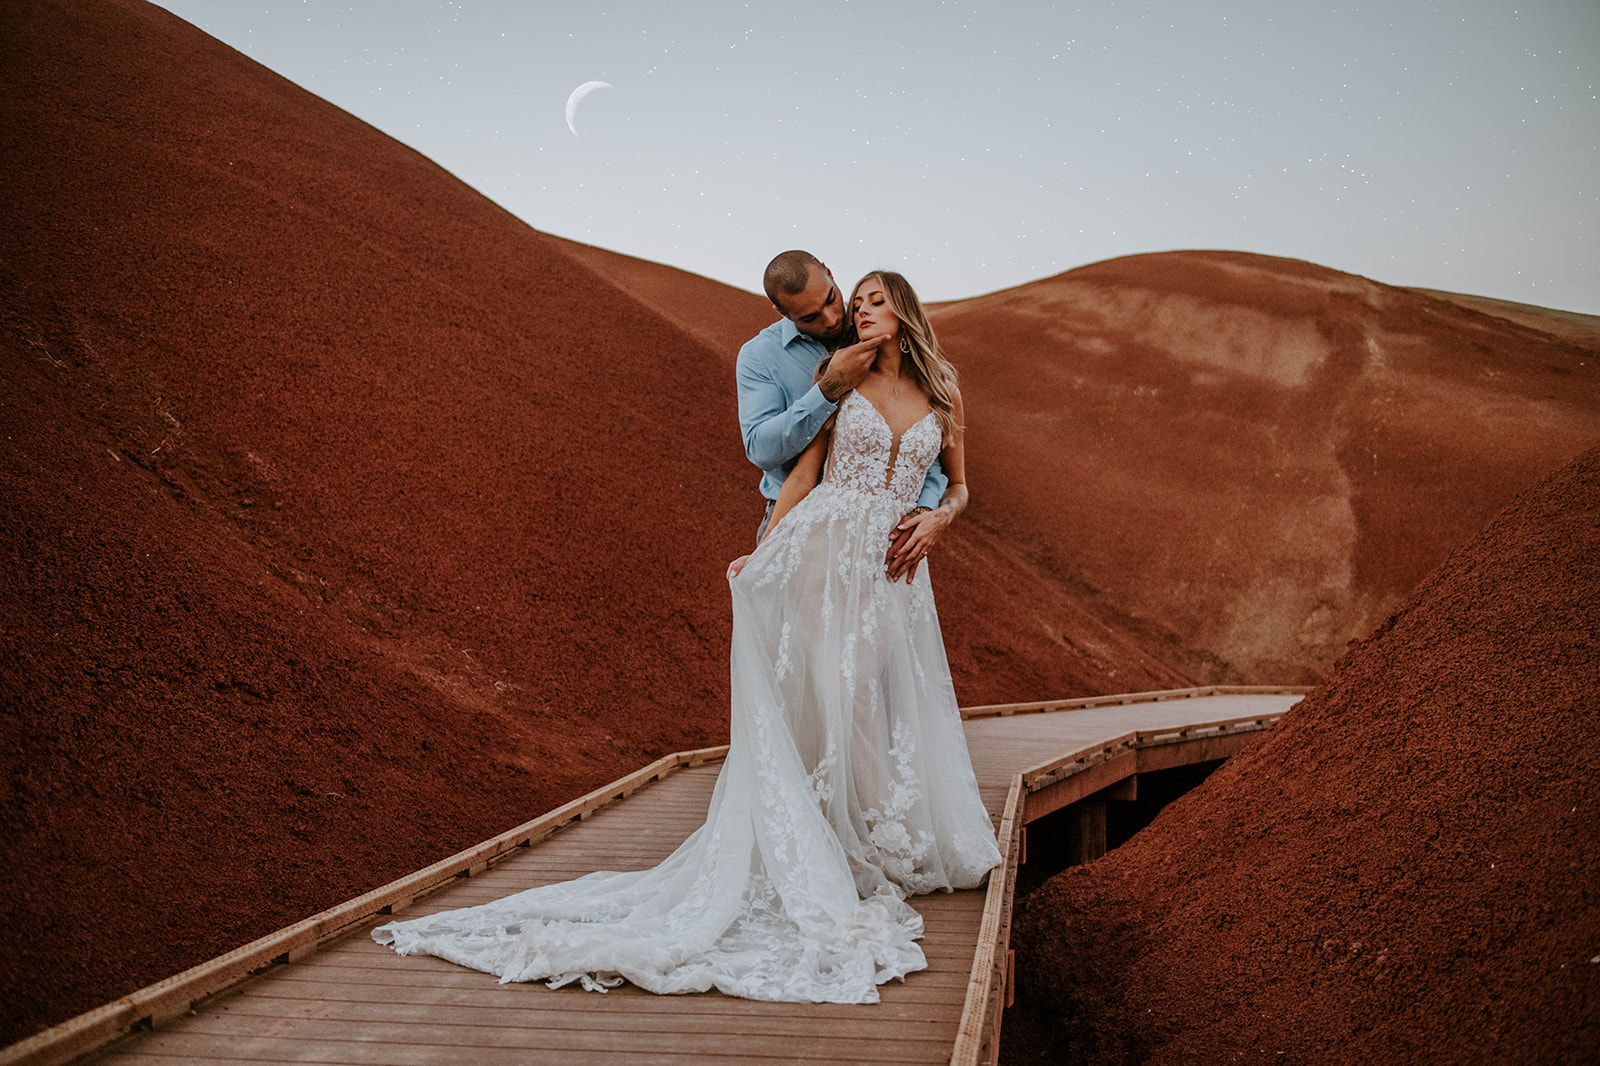 A couple who eloped on the bride at the Painted Hills at twilight